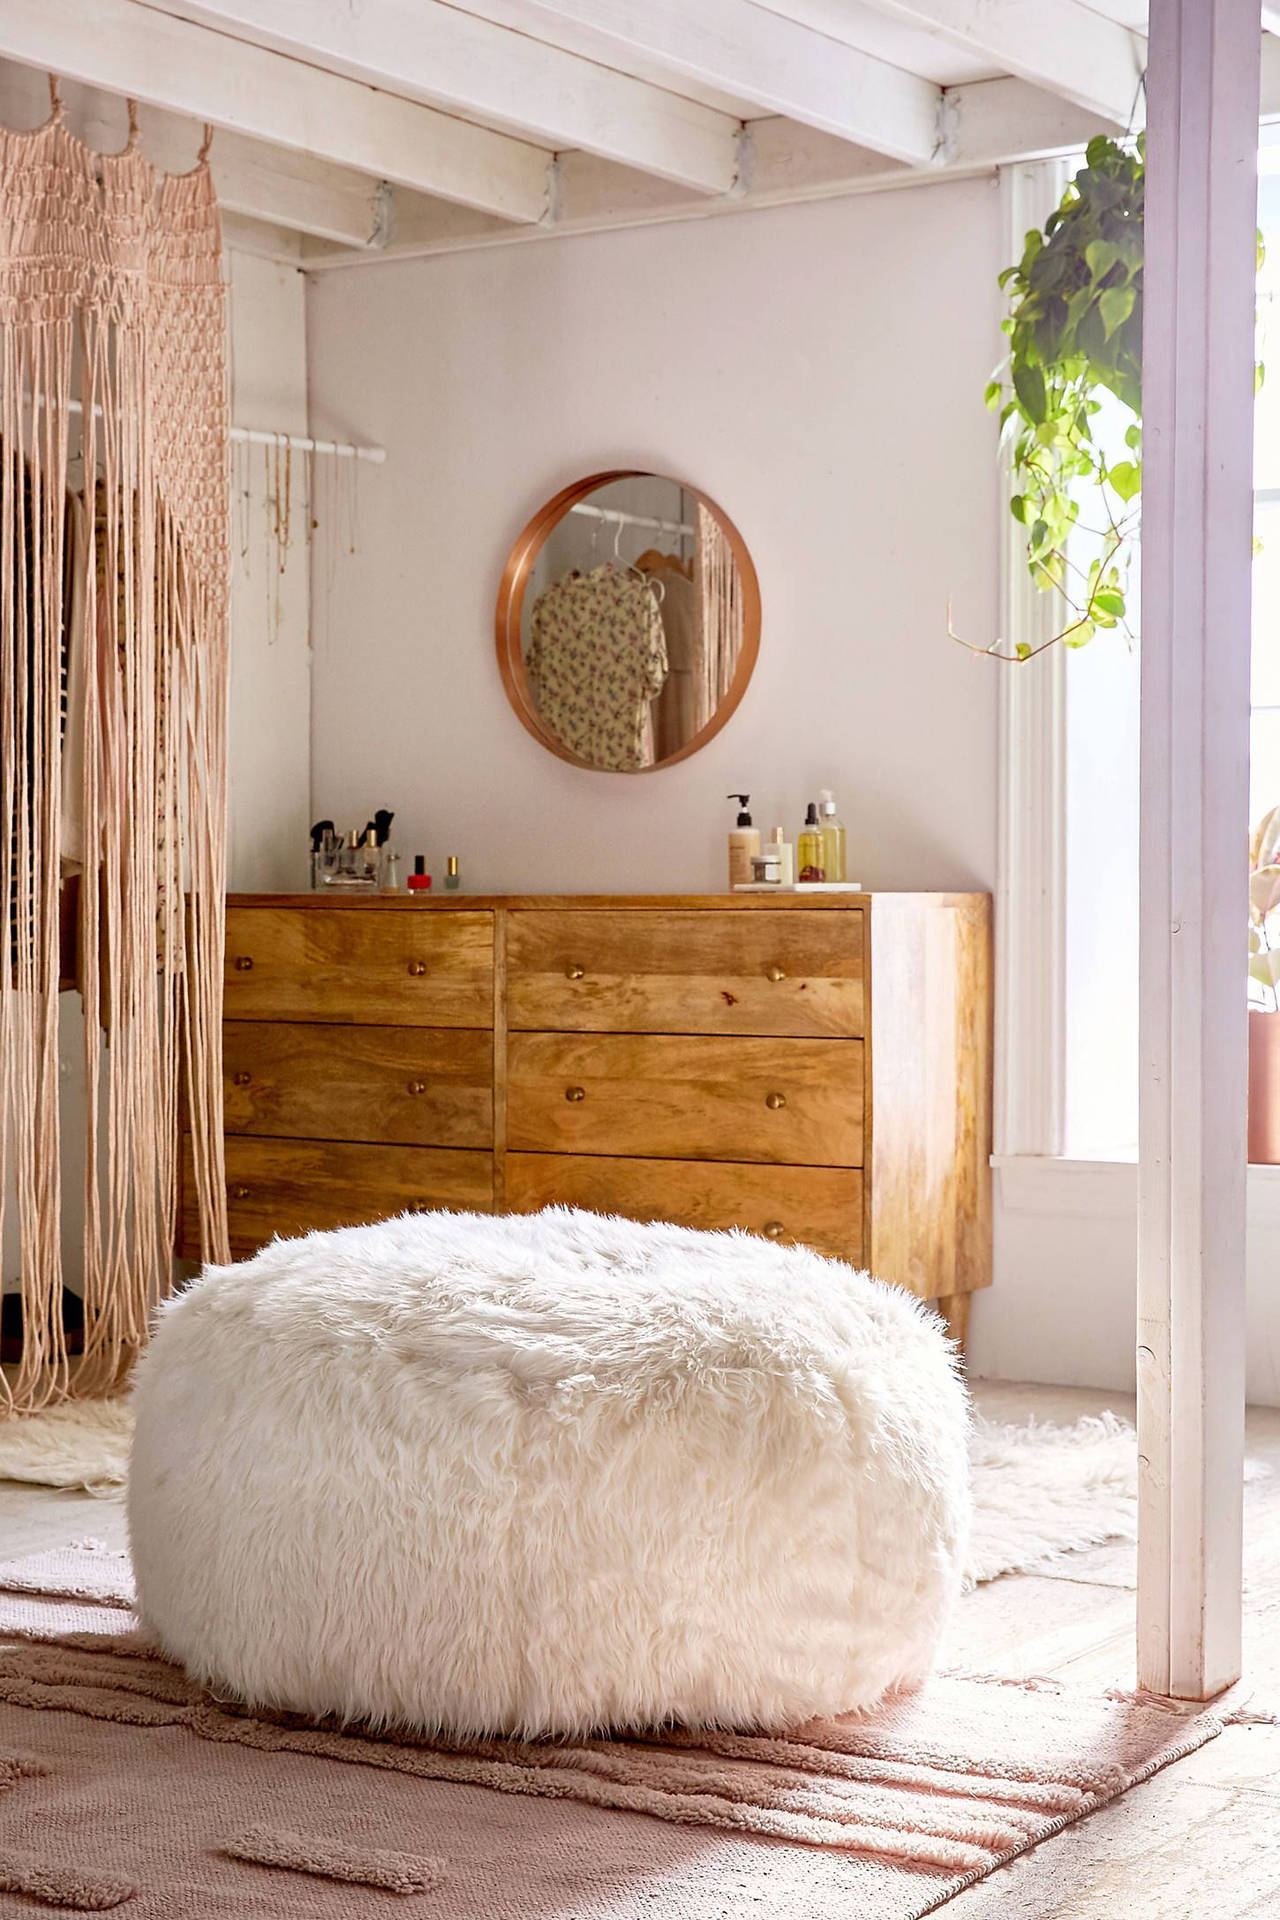 Round Fur Couch Inside A Stylish Room